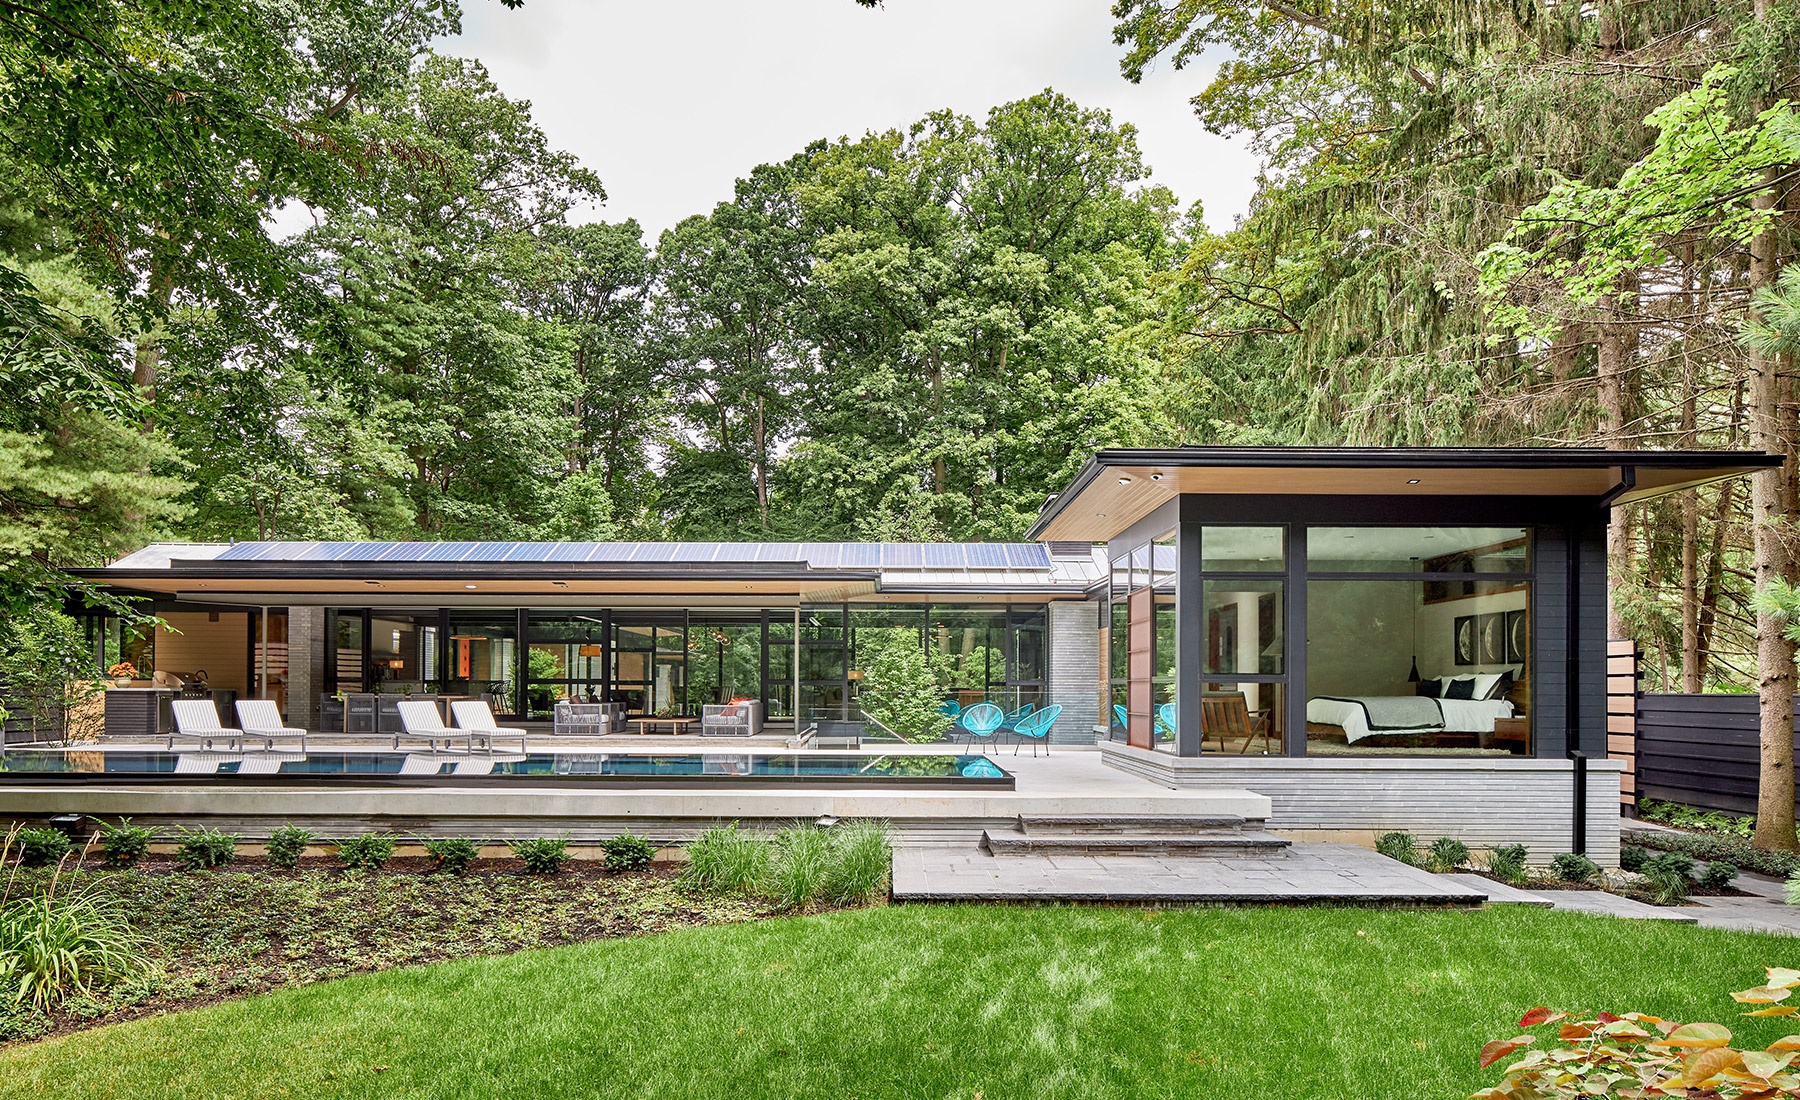 Modern home with solar panels, clean lines and stone siding.